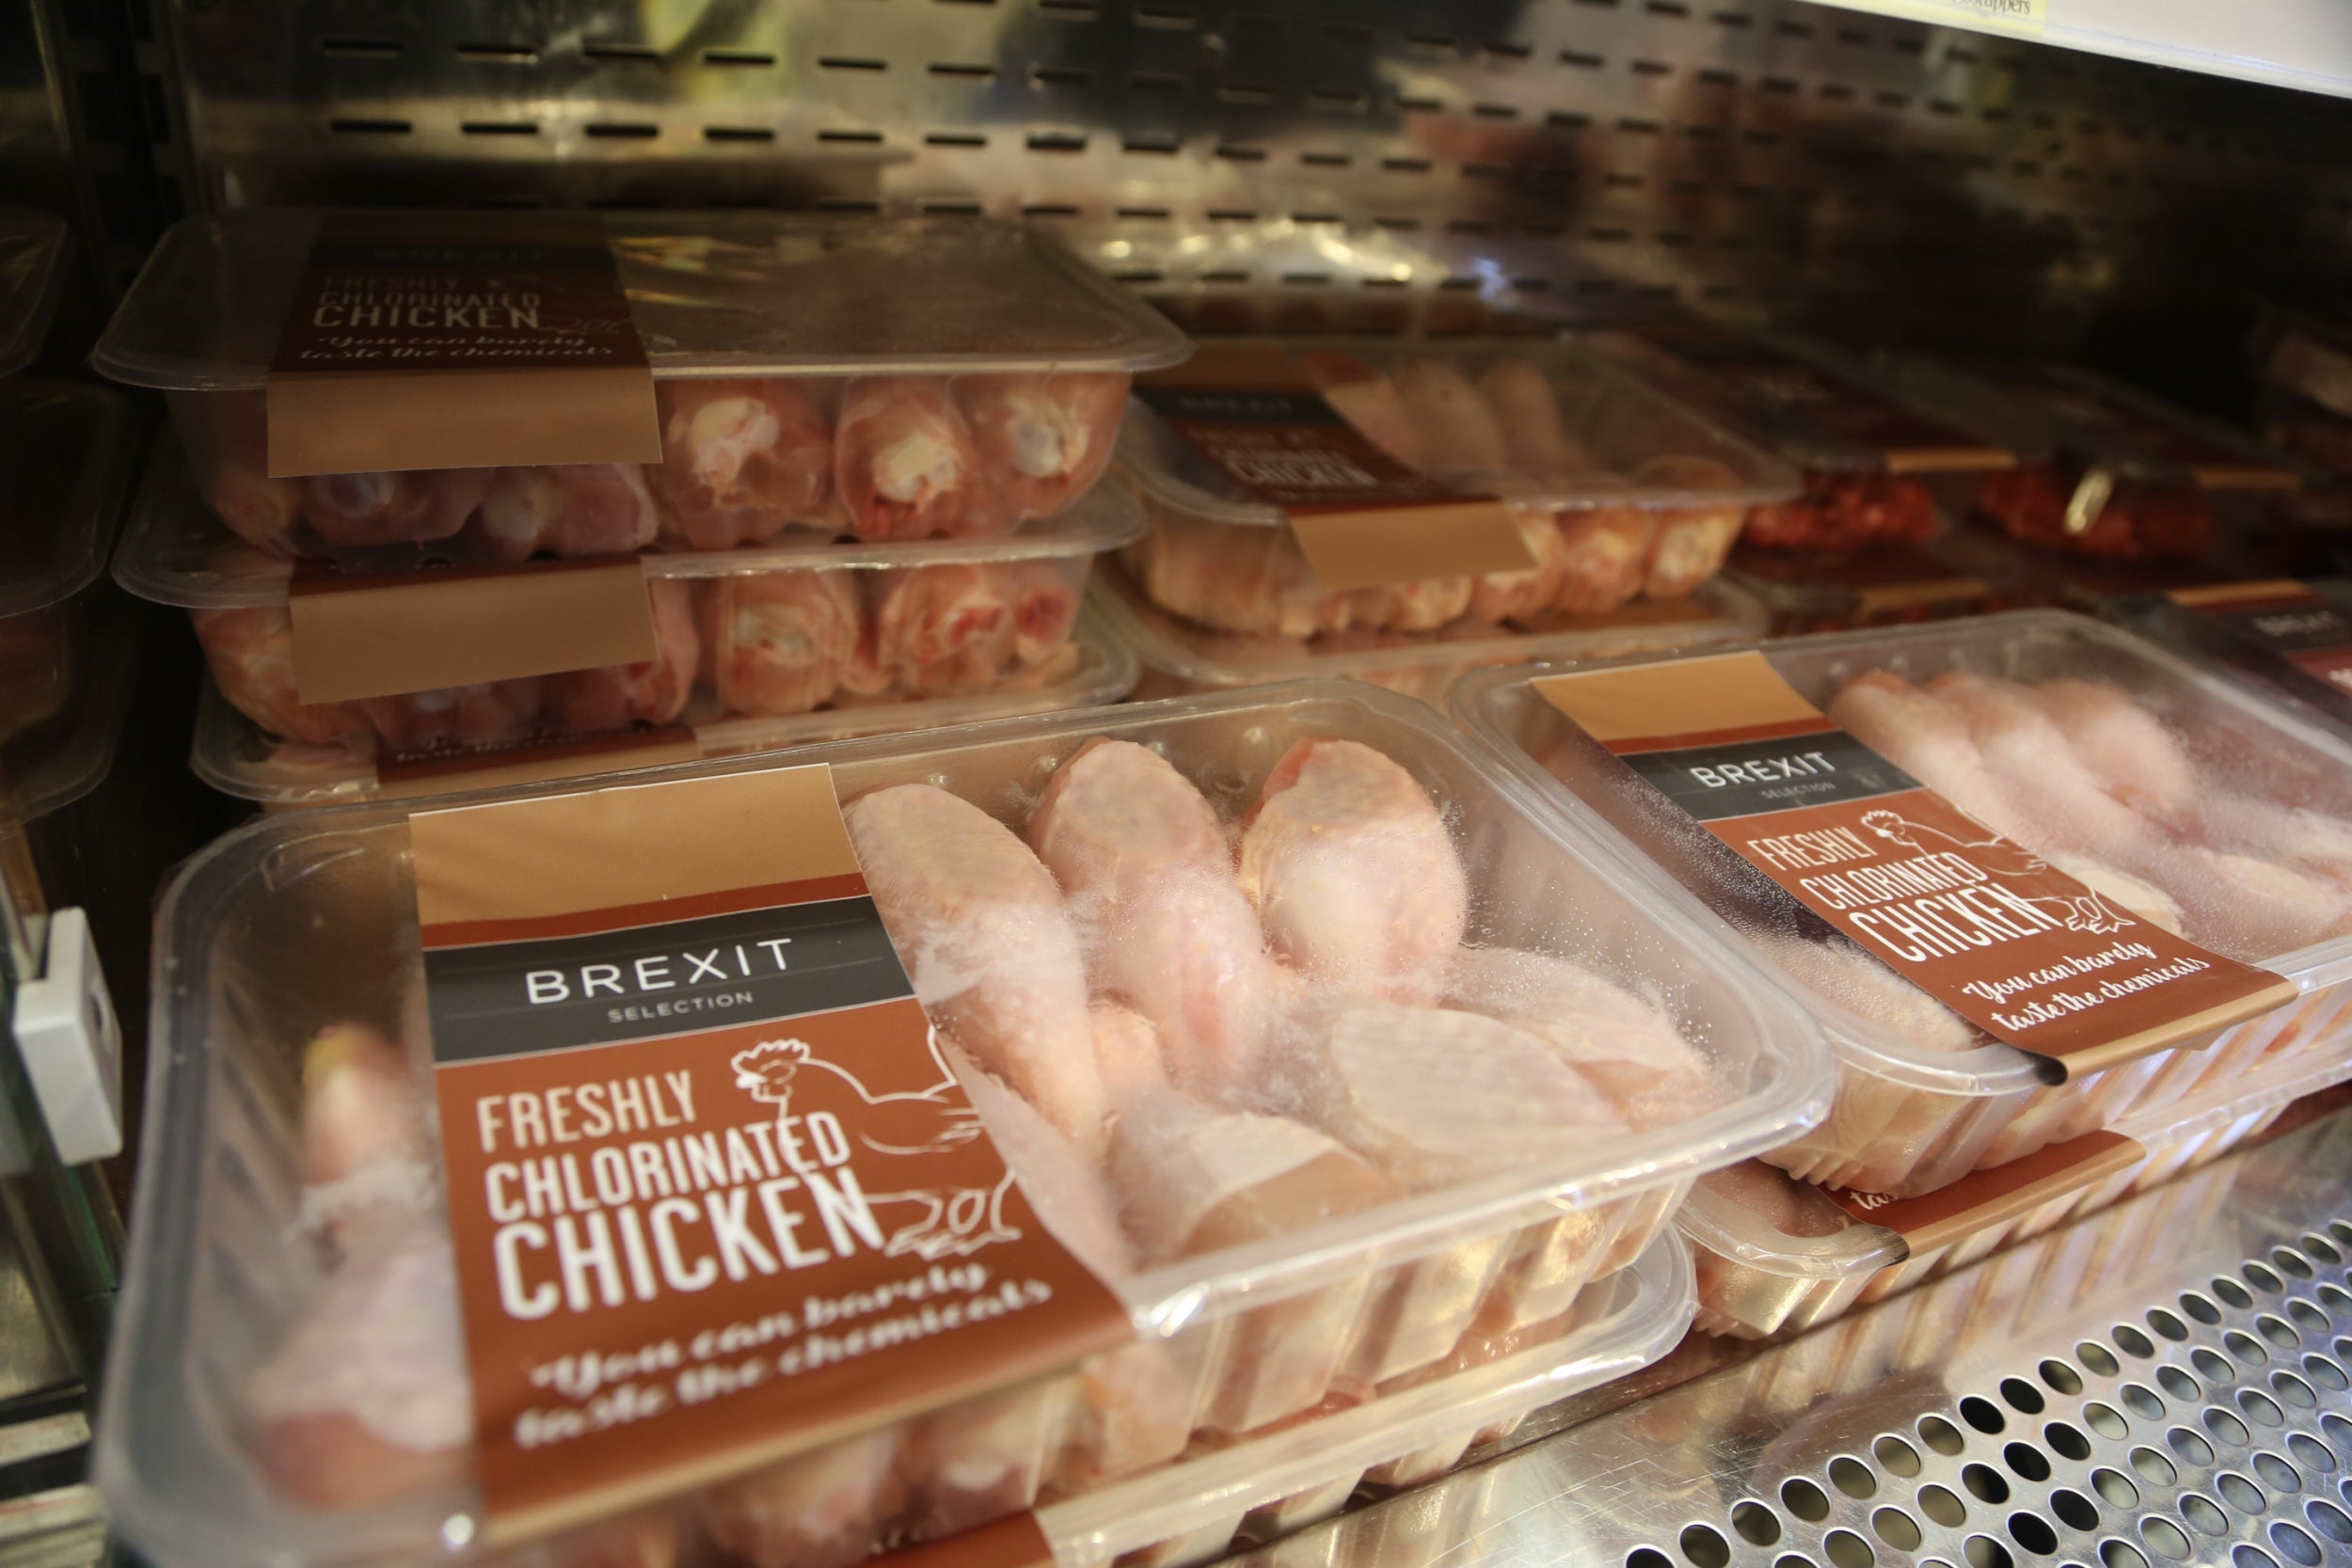 Packs of ‘Brexit Selection Freshly Chlorinated Chicken’ sit on display at ‘Costupper’ Brexit Minimart pop-up store, set up by the People’s Vote campaign group, in November 2018